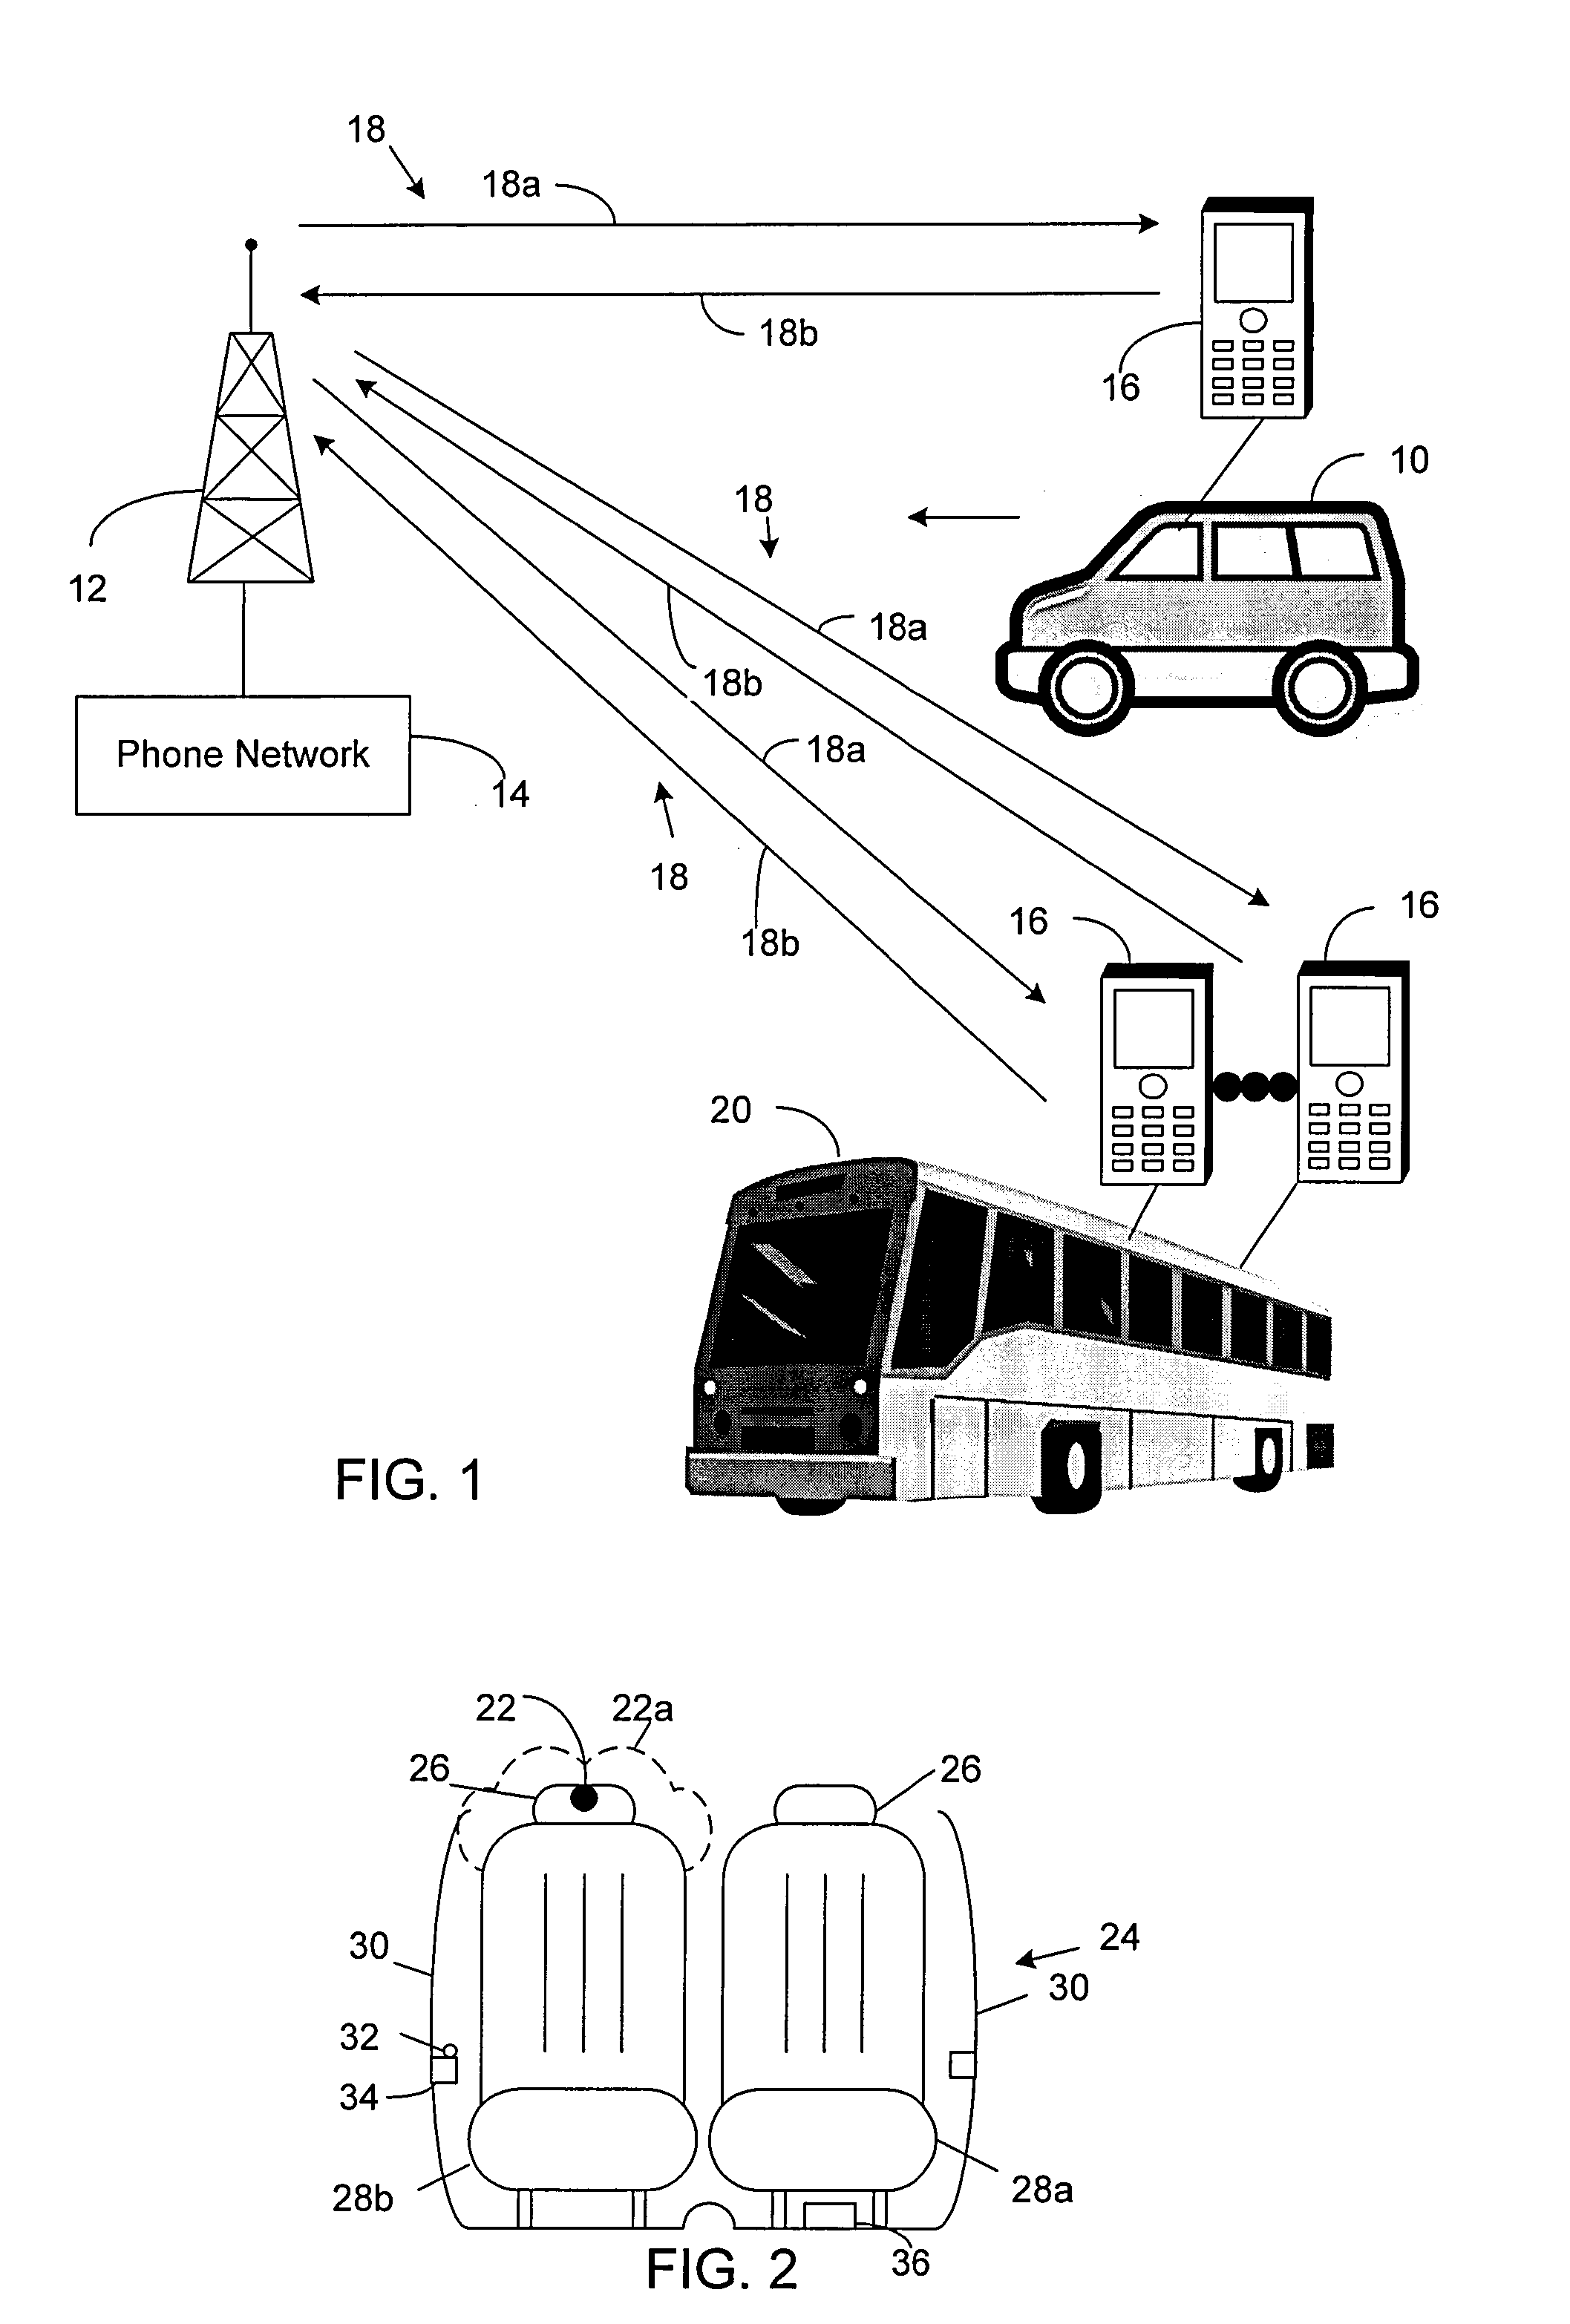 Method for safe operation of mobile phone in a car environment